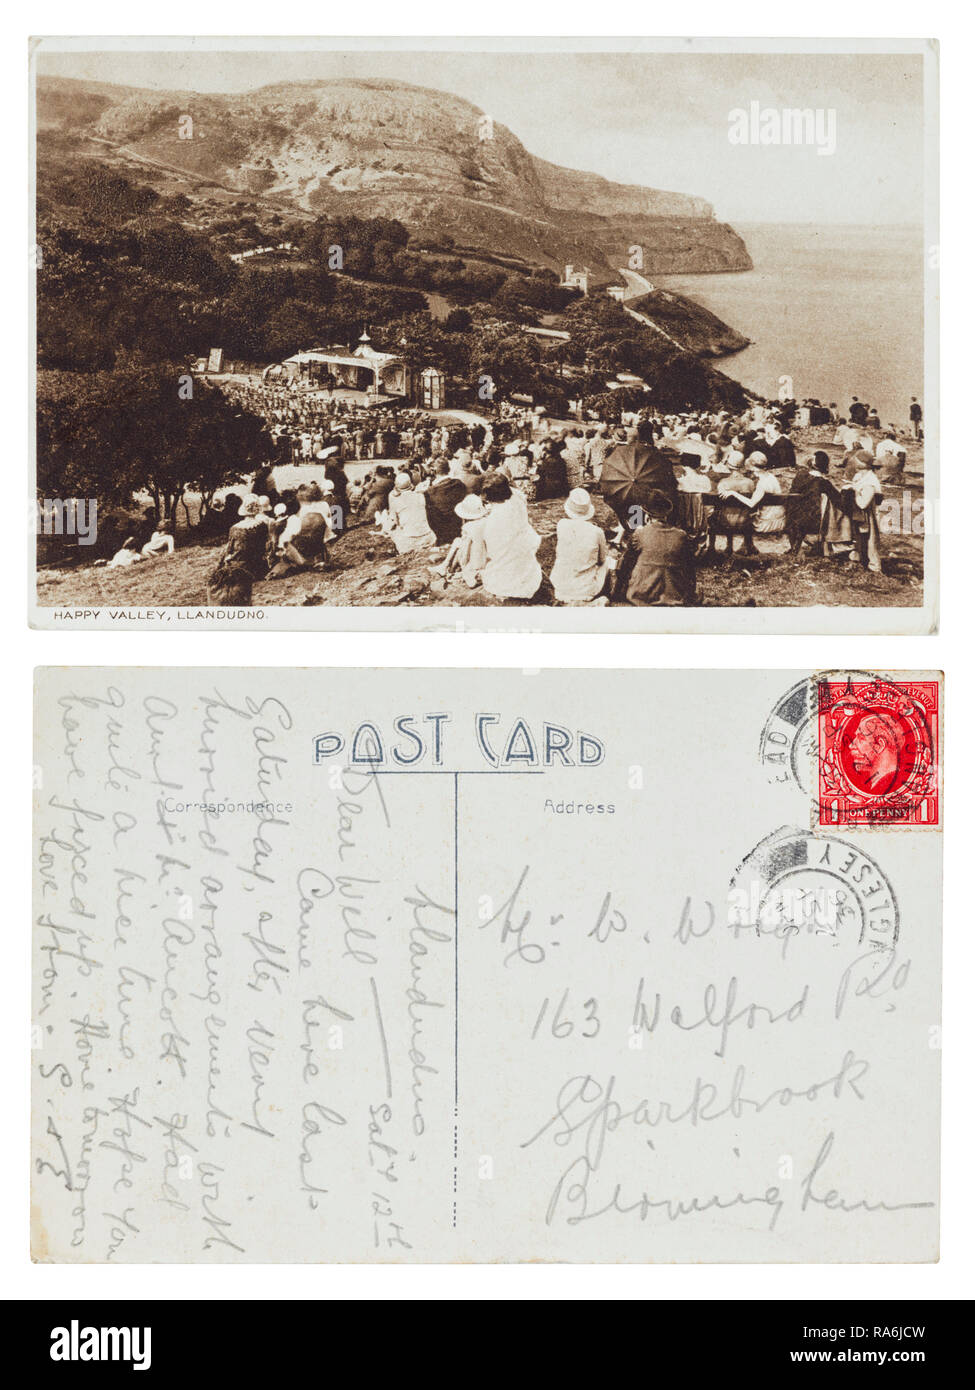 Postcard from Mr Will Wright at 163 Walford Road, Sparkbrook, Birmingham from Llandudno, Happy Valley in 1936 Stock Photo